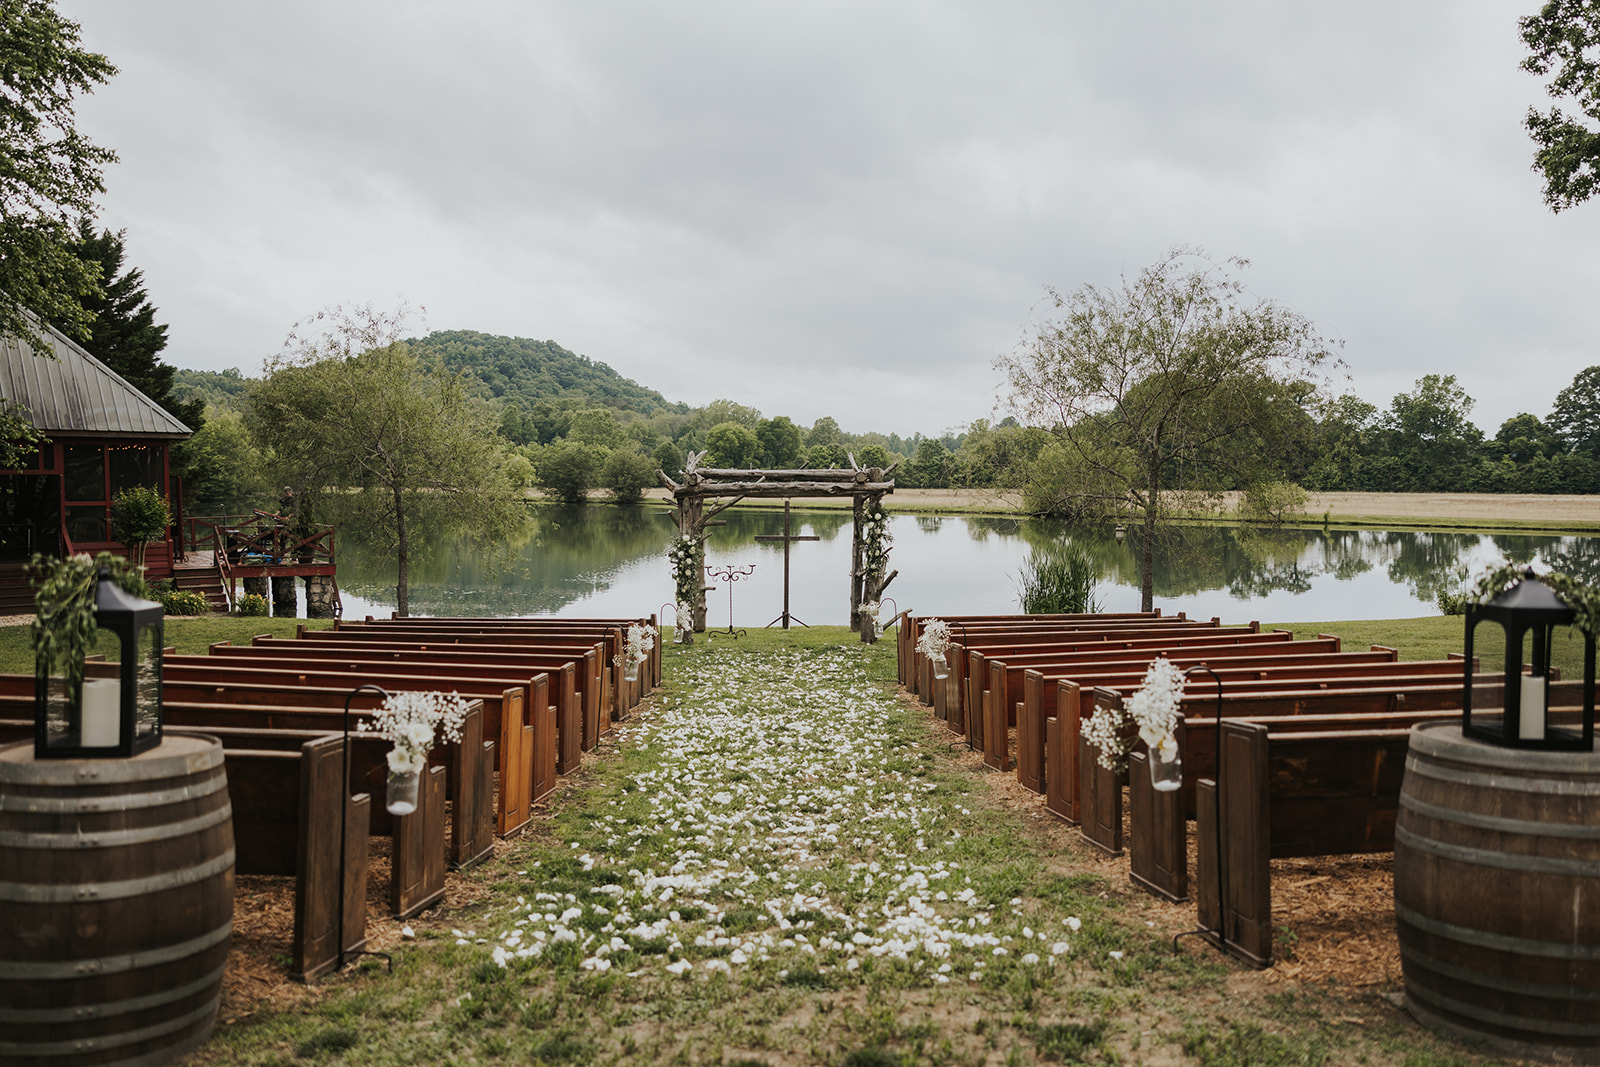 Beautiful lakeside ceremony site outside of one of my favorite Georgia wedding venues!